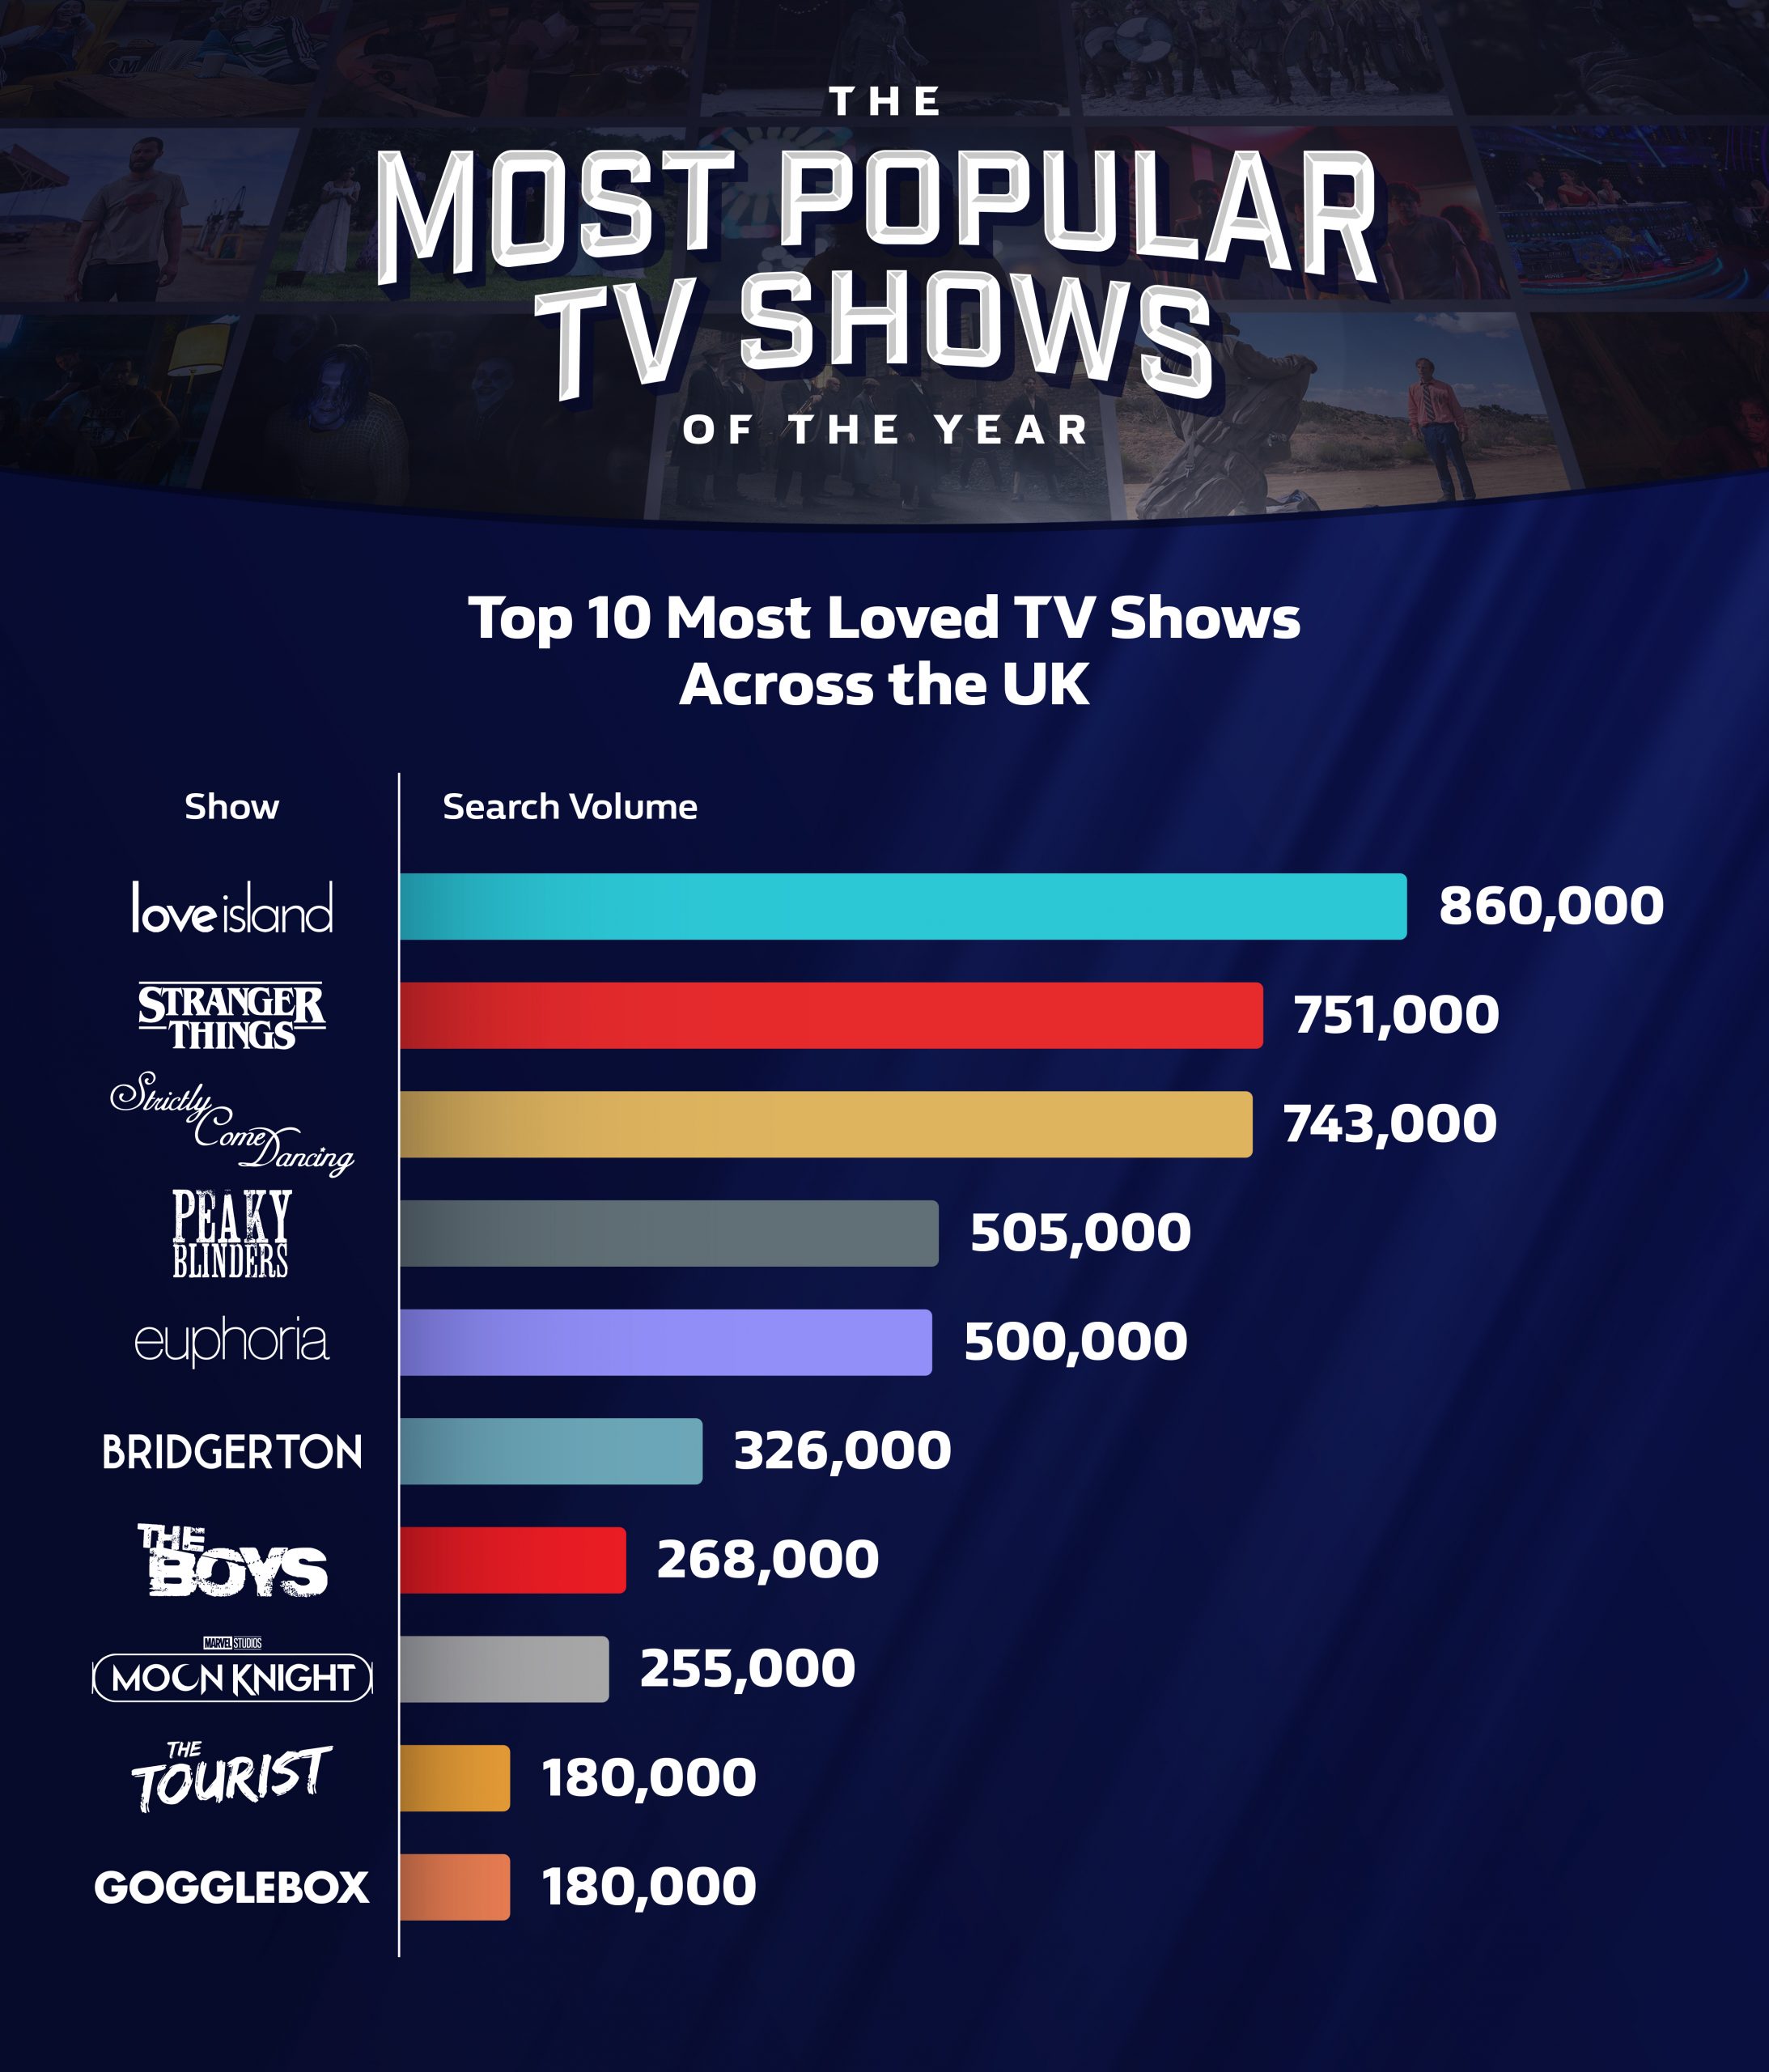 Top 10 TV shows in the UK